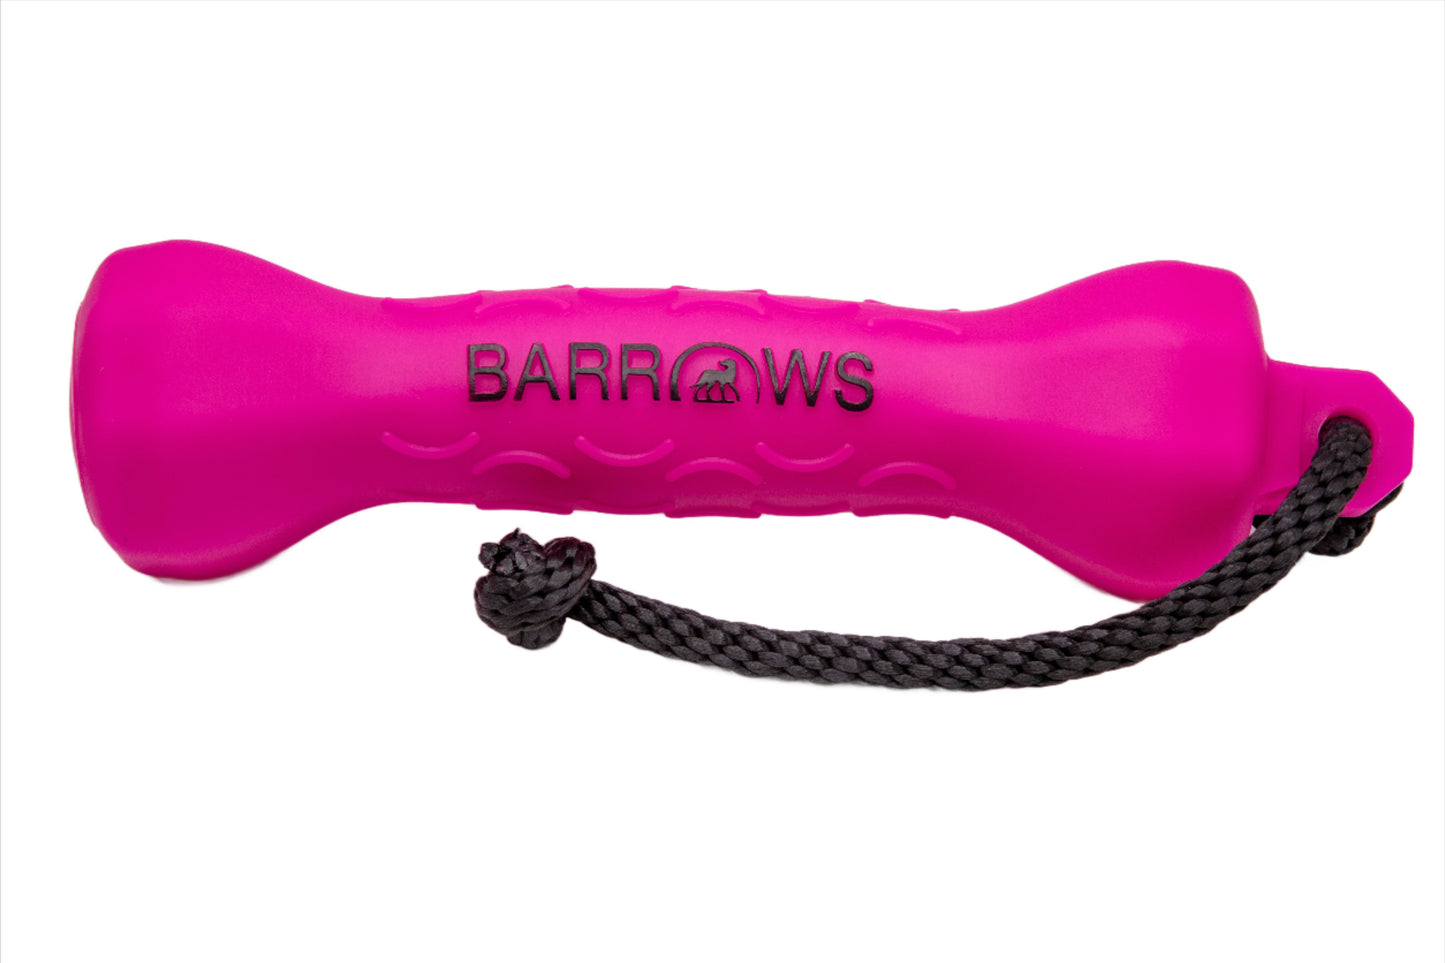 Barrows Outdoor Pink Dog Training Bumper with Integrated Throw Rope for Enhanced Retrieval Training.